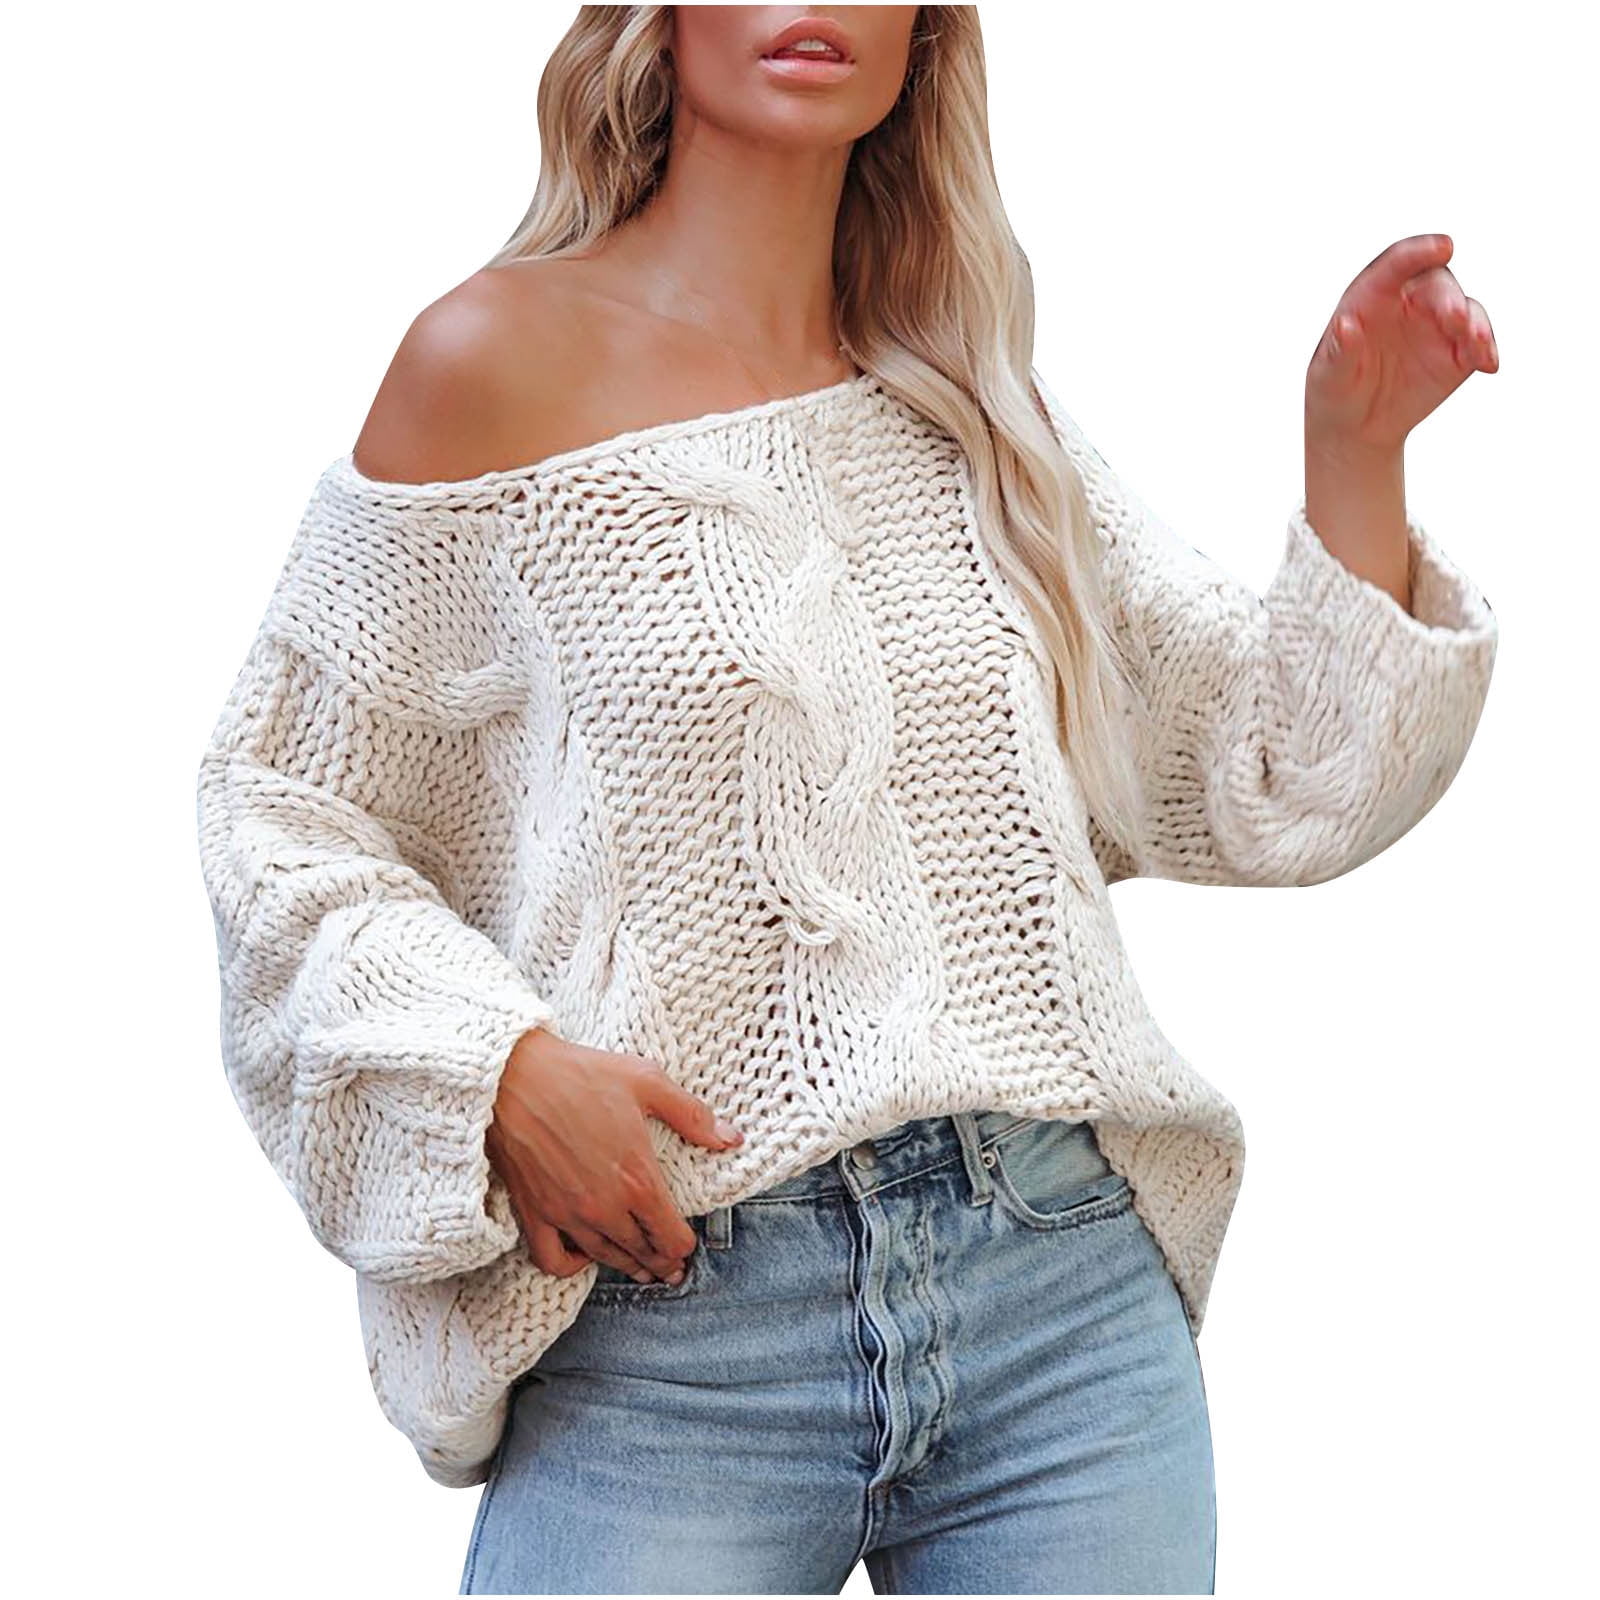 Hfyihgf Womens Oversized Sweater Long Sleeve Sexy Off Shoulder Pullover  Sweaters Batwing Sleeve Cable Knit Slouchy Tops(White,M) 